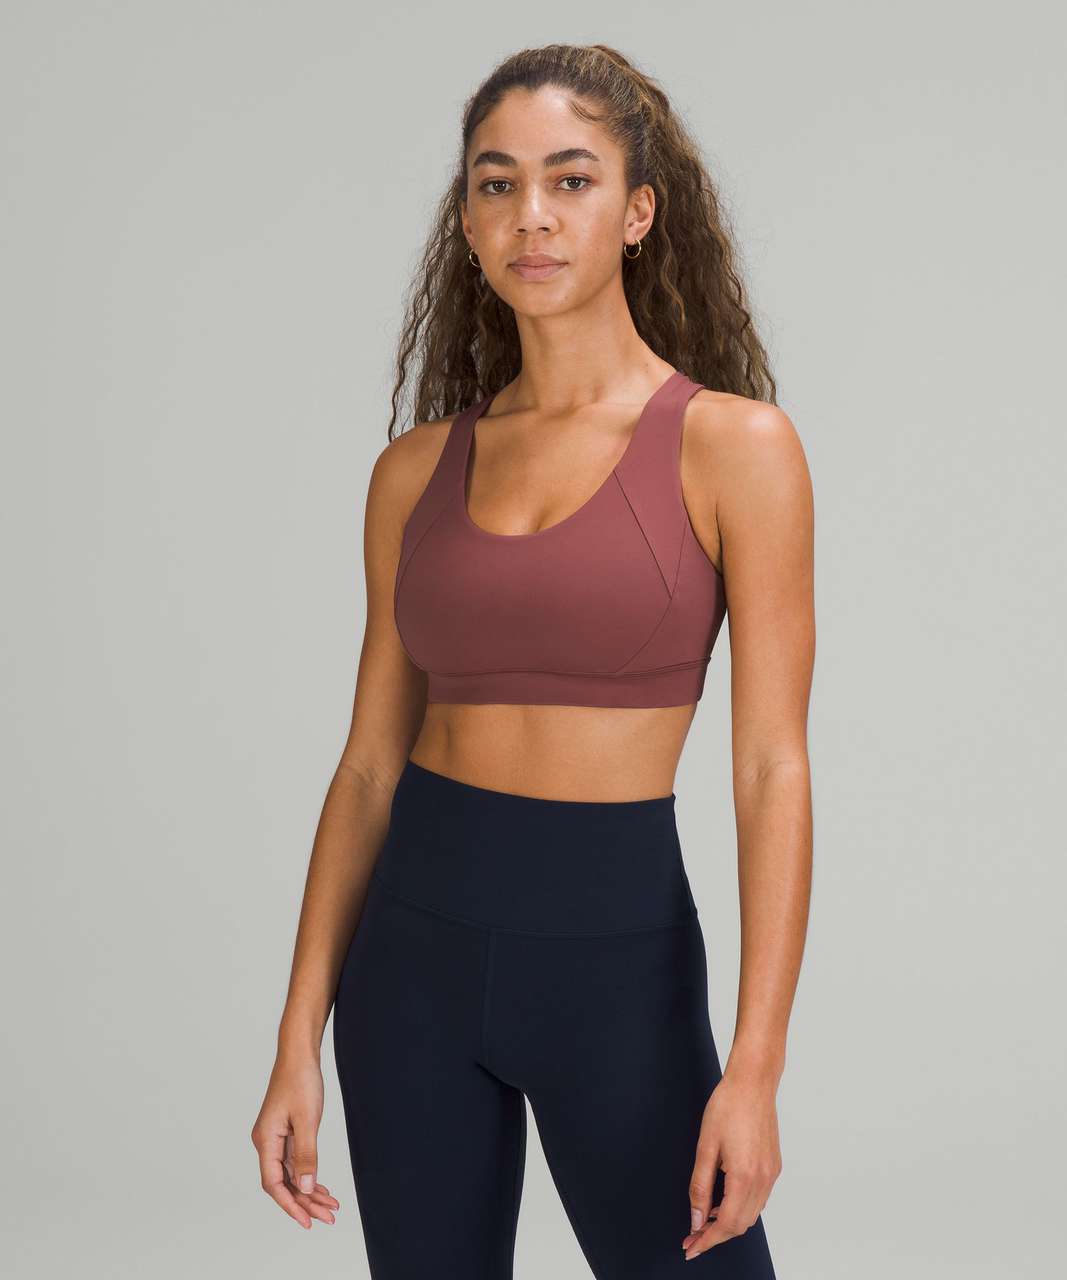 Lululemon Free to Be Elevated Bra *Light Support, DD/DDD(E) Cup - Smoky Red